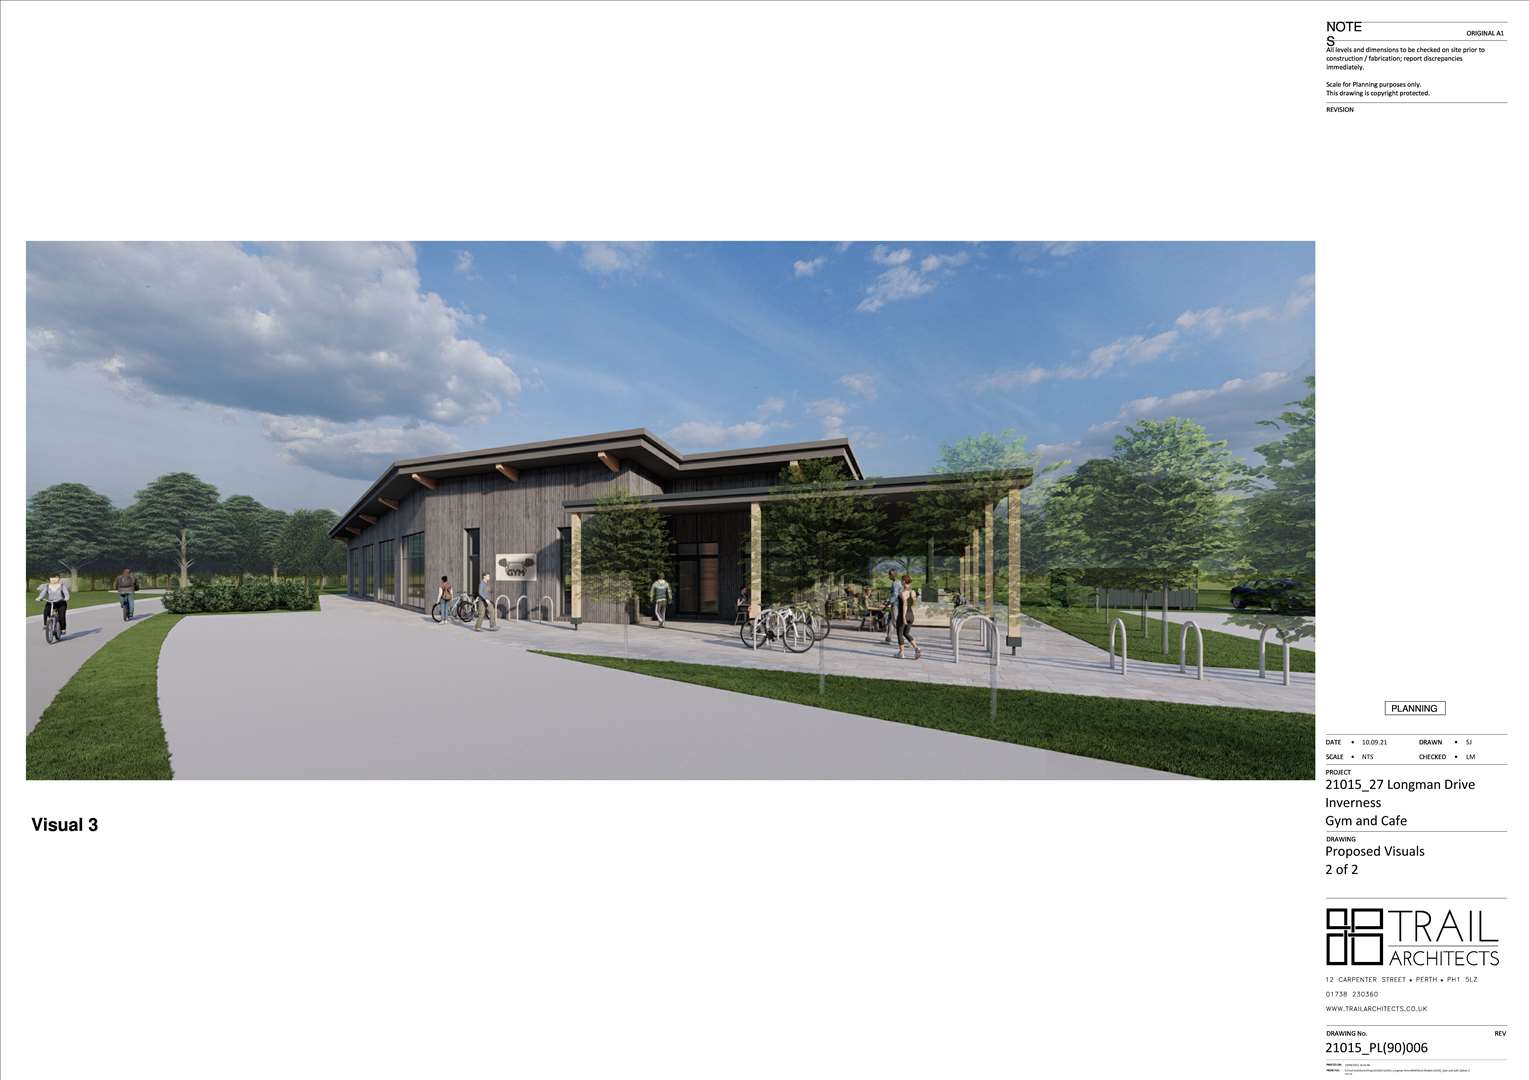 A computer visual of the proposed gym/cafe.